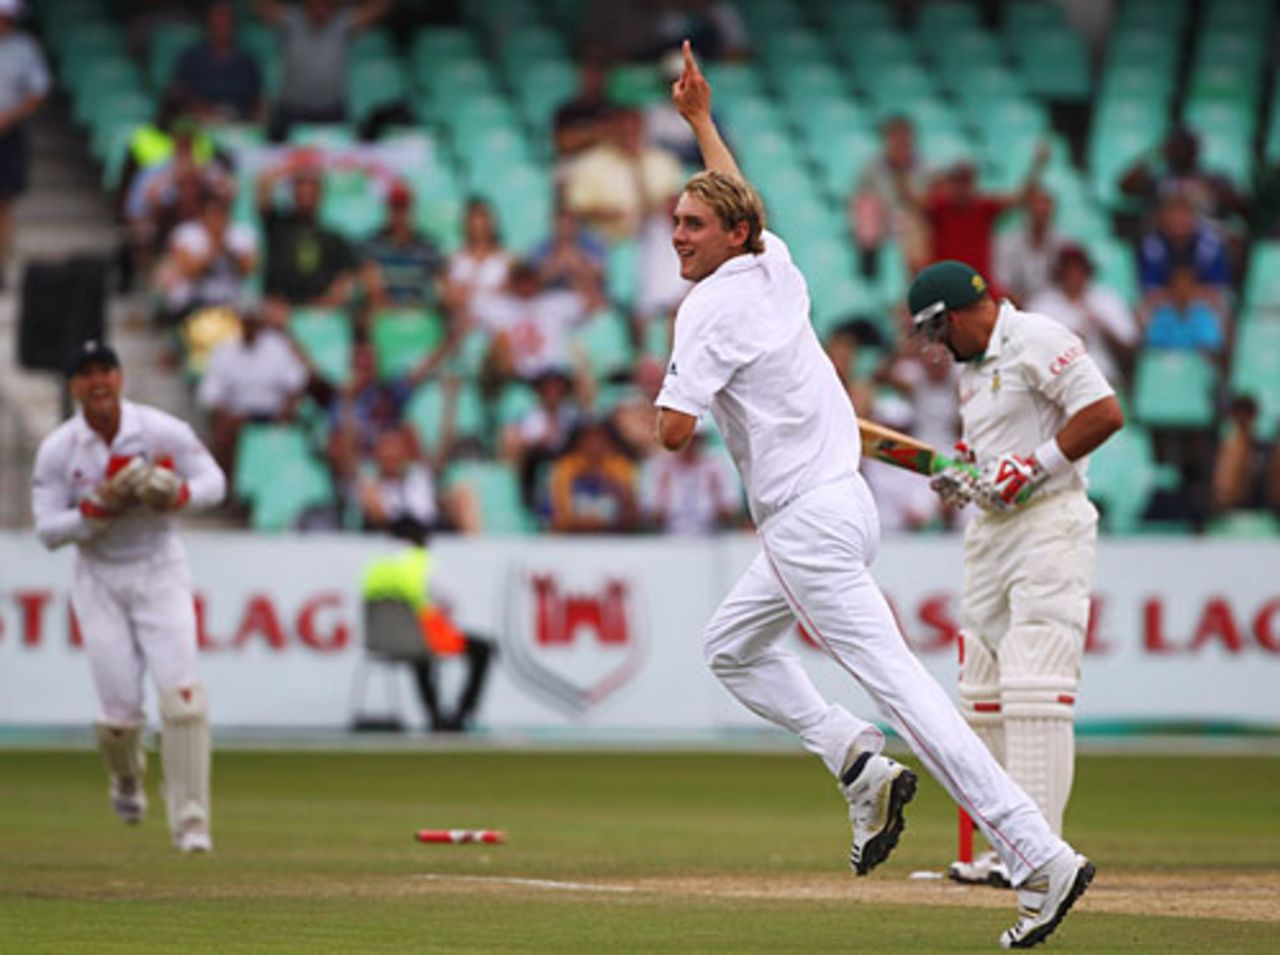 Stuart Broad started a blistering spell after tea by removing Jacques Kallis with one that came back, South Africa v England, 2nd Test, Durban, December 29, 2009 